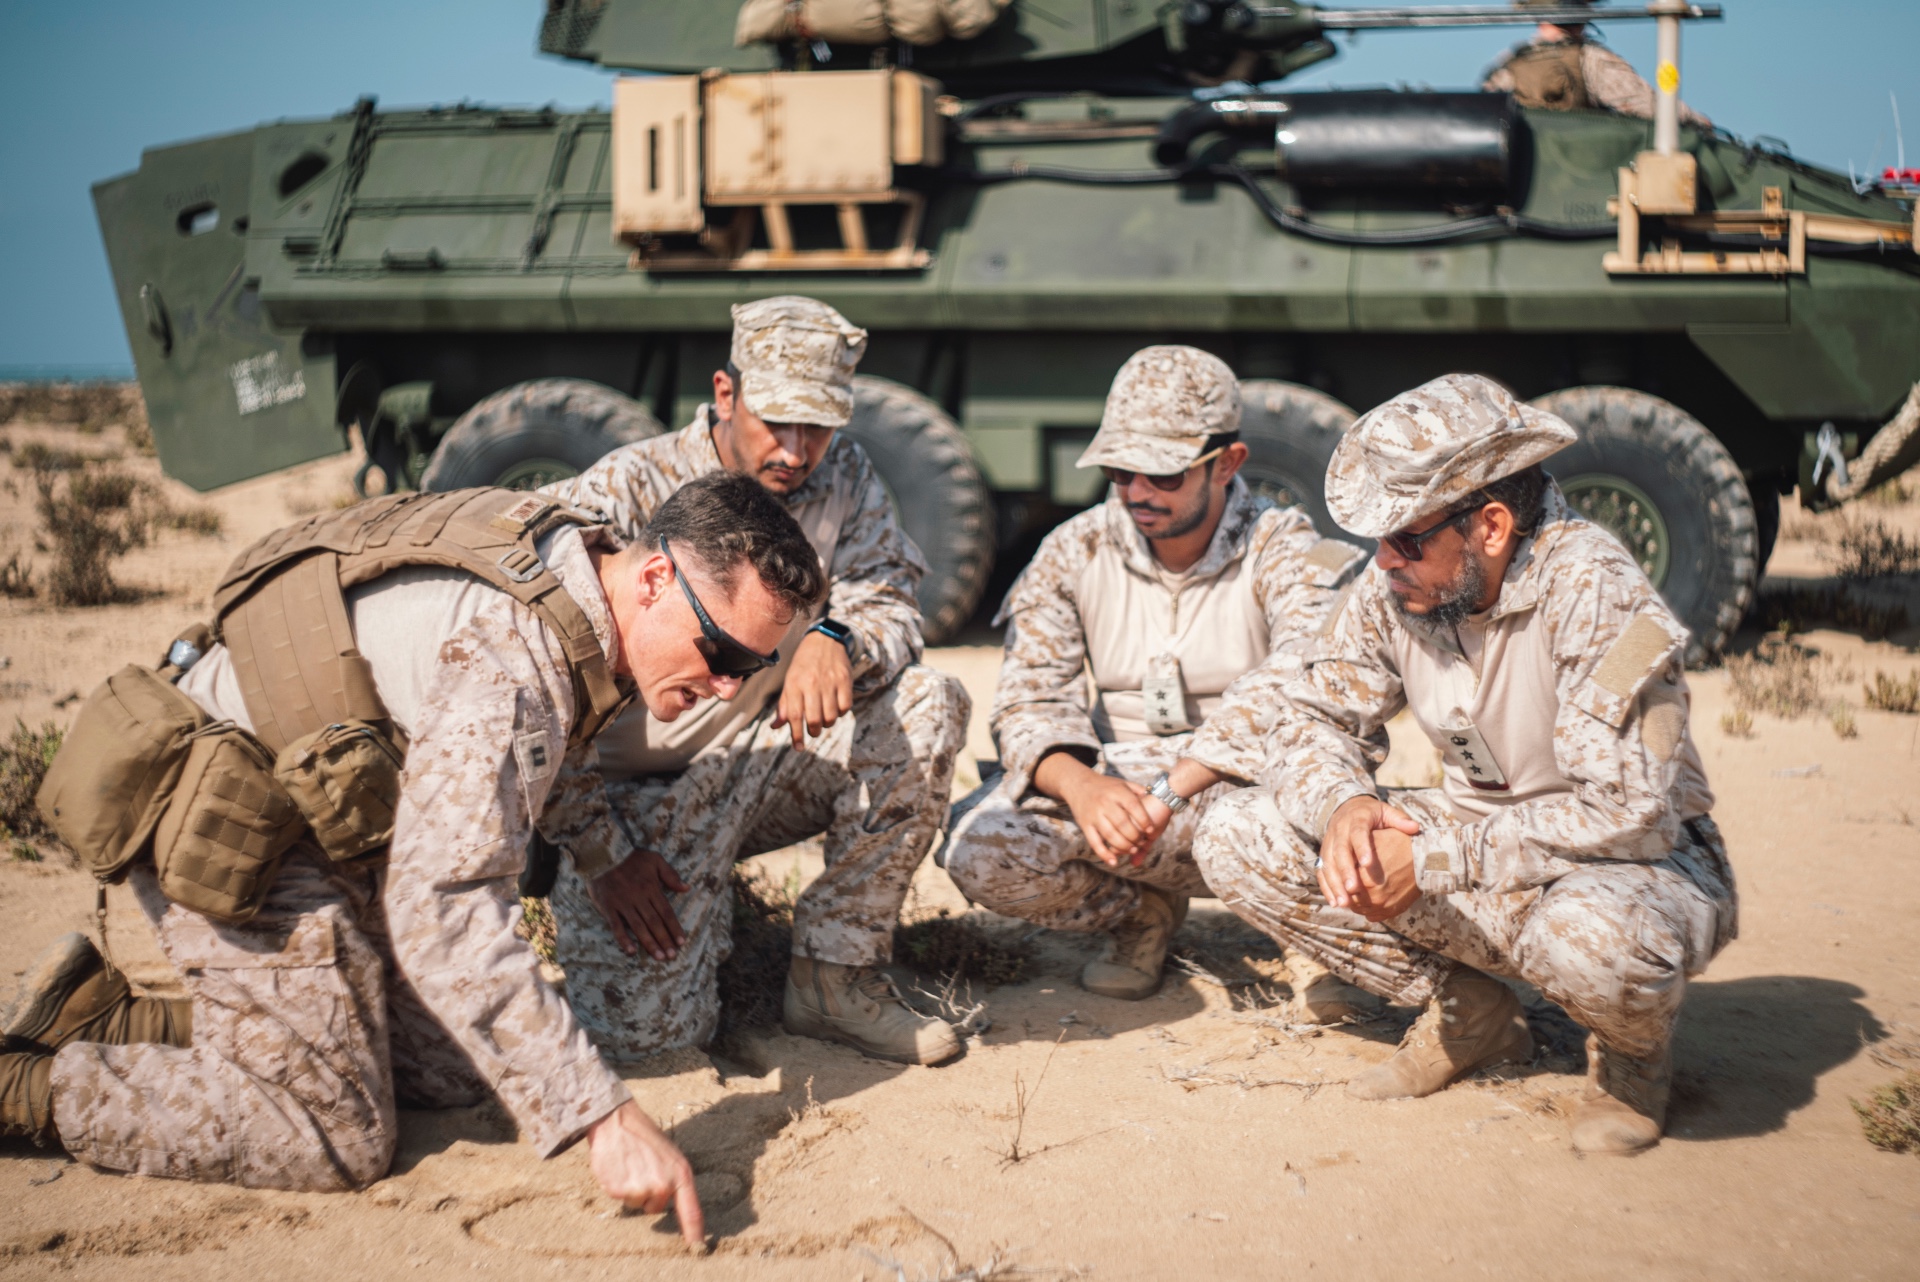 the 11th Marine Expeditionary Unit, briefs the scheme of maneuver for an integrated exercise with members of the Royal Saudi Naval Forces during exercise Indigo Defender 21 at Jazirat al Ghurab Island, Saudi Arabia